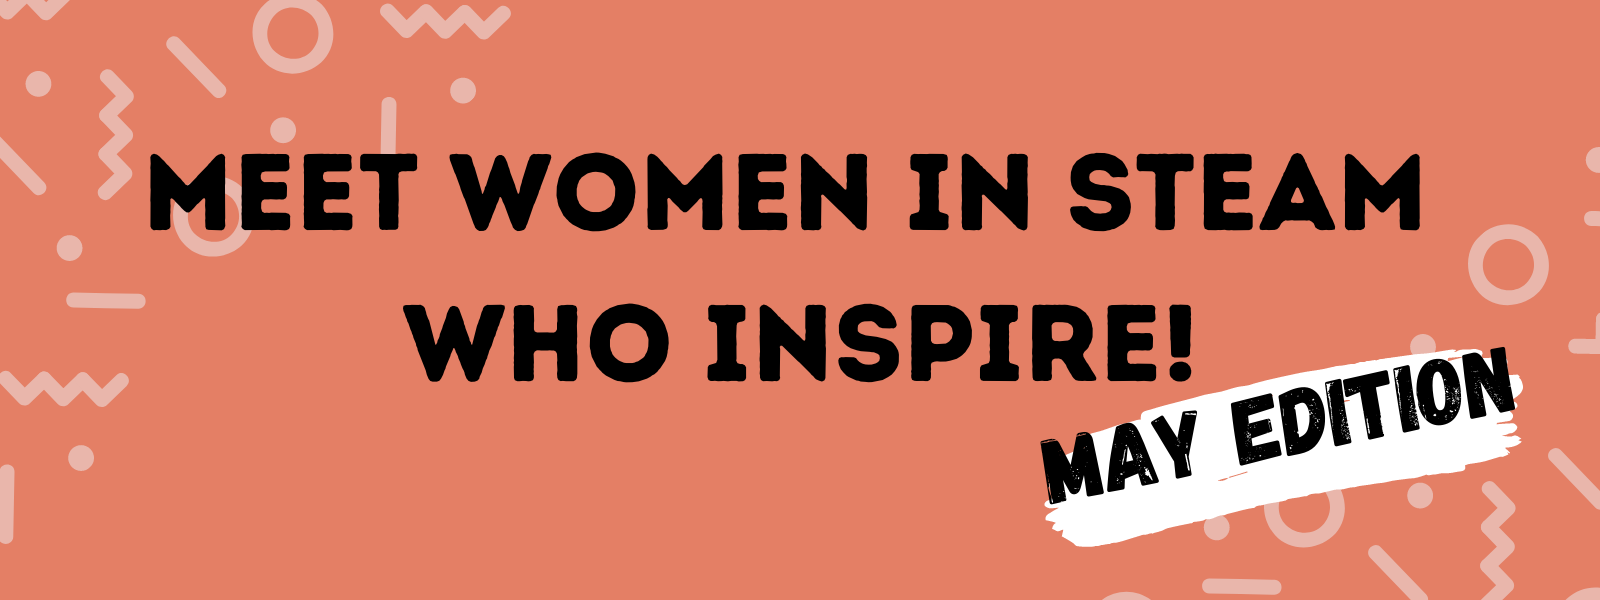 Meet women in STEAM who inspire May edition